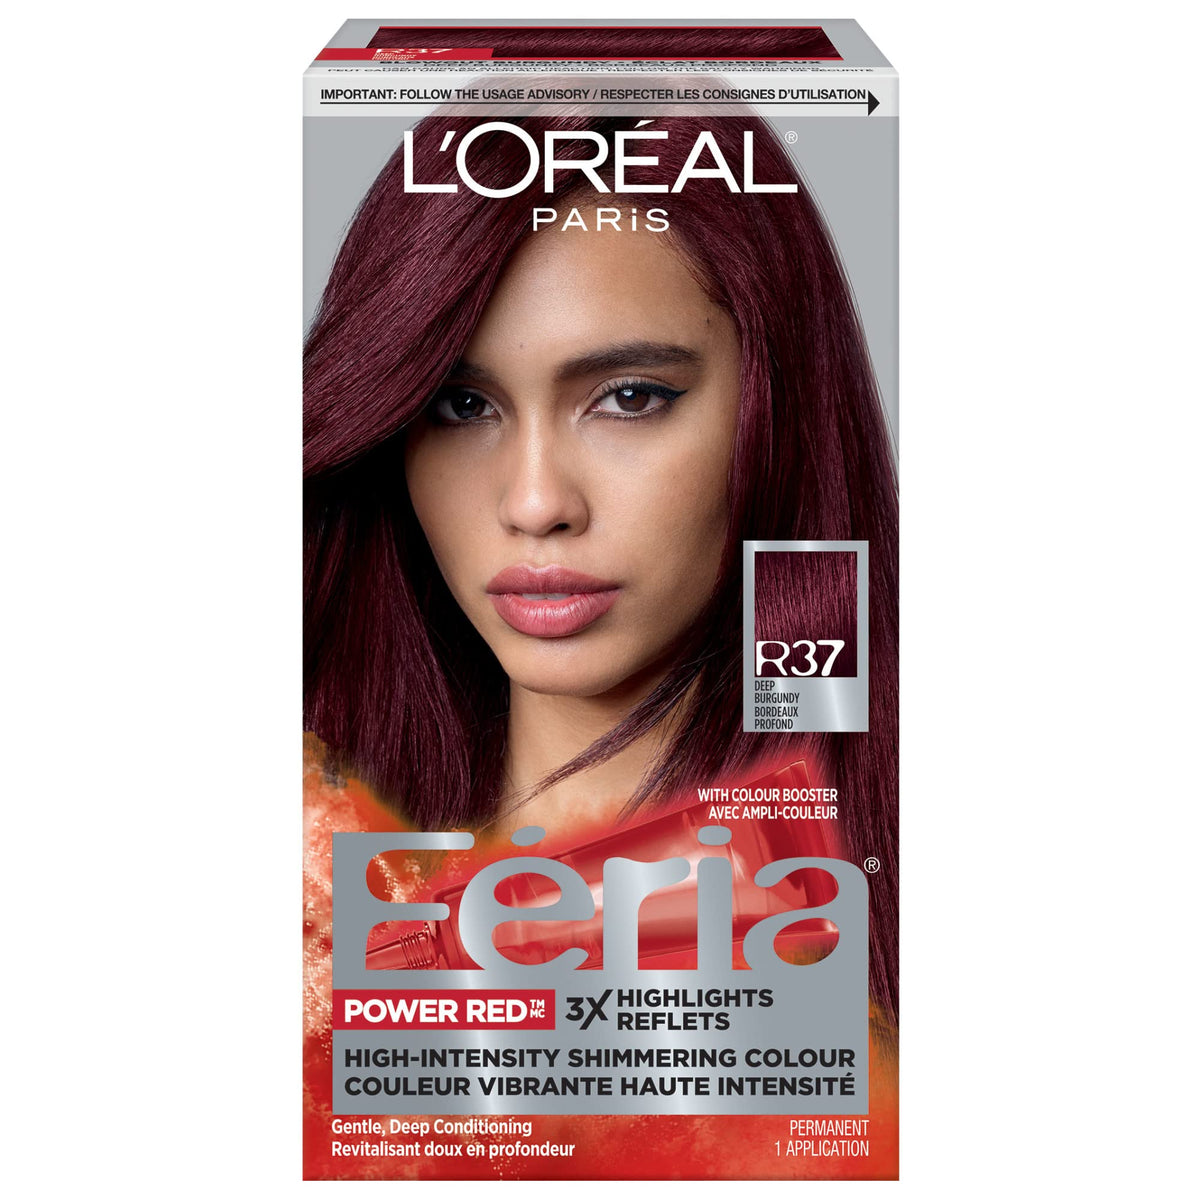 L'Oreal Paris Feria high-intensity shimmering colour Permanent Hair Colour, R37 deep burgundy, Hair Dye with Conditioning Oils, Pack of 1